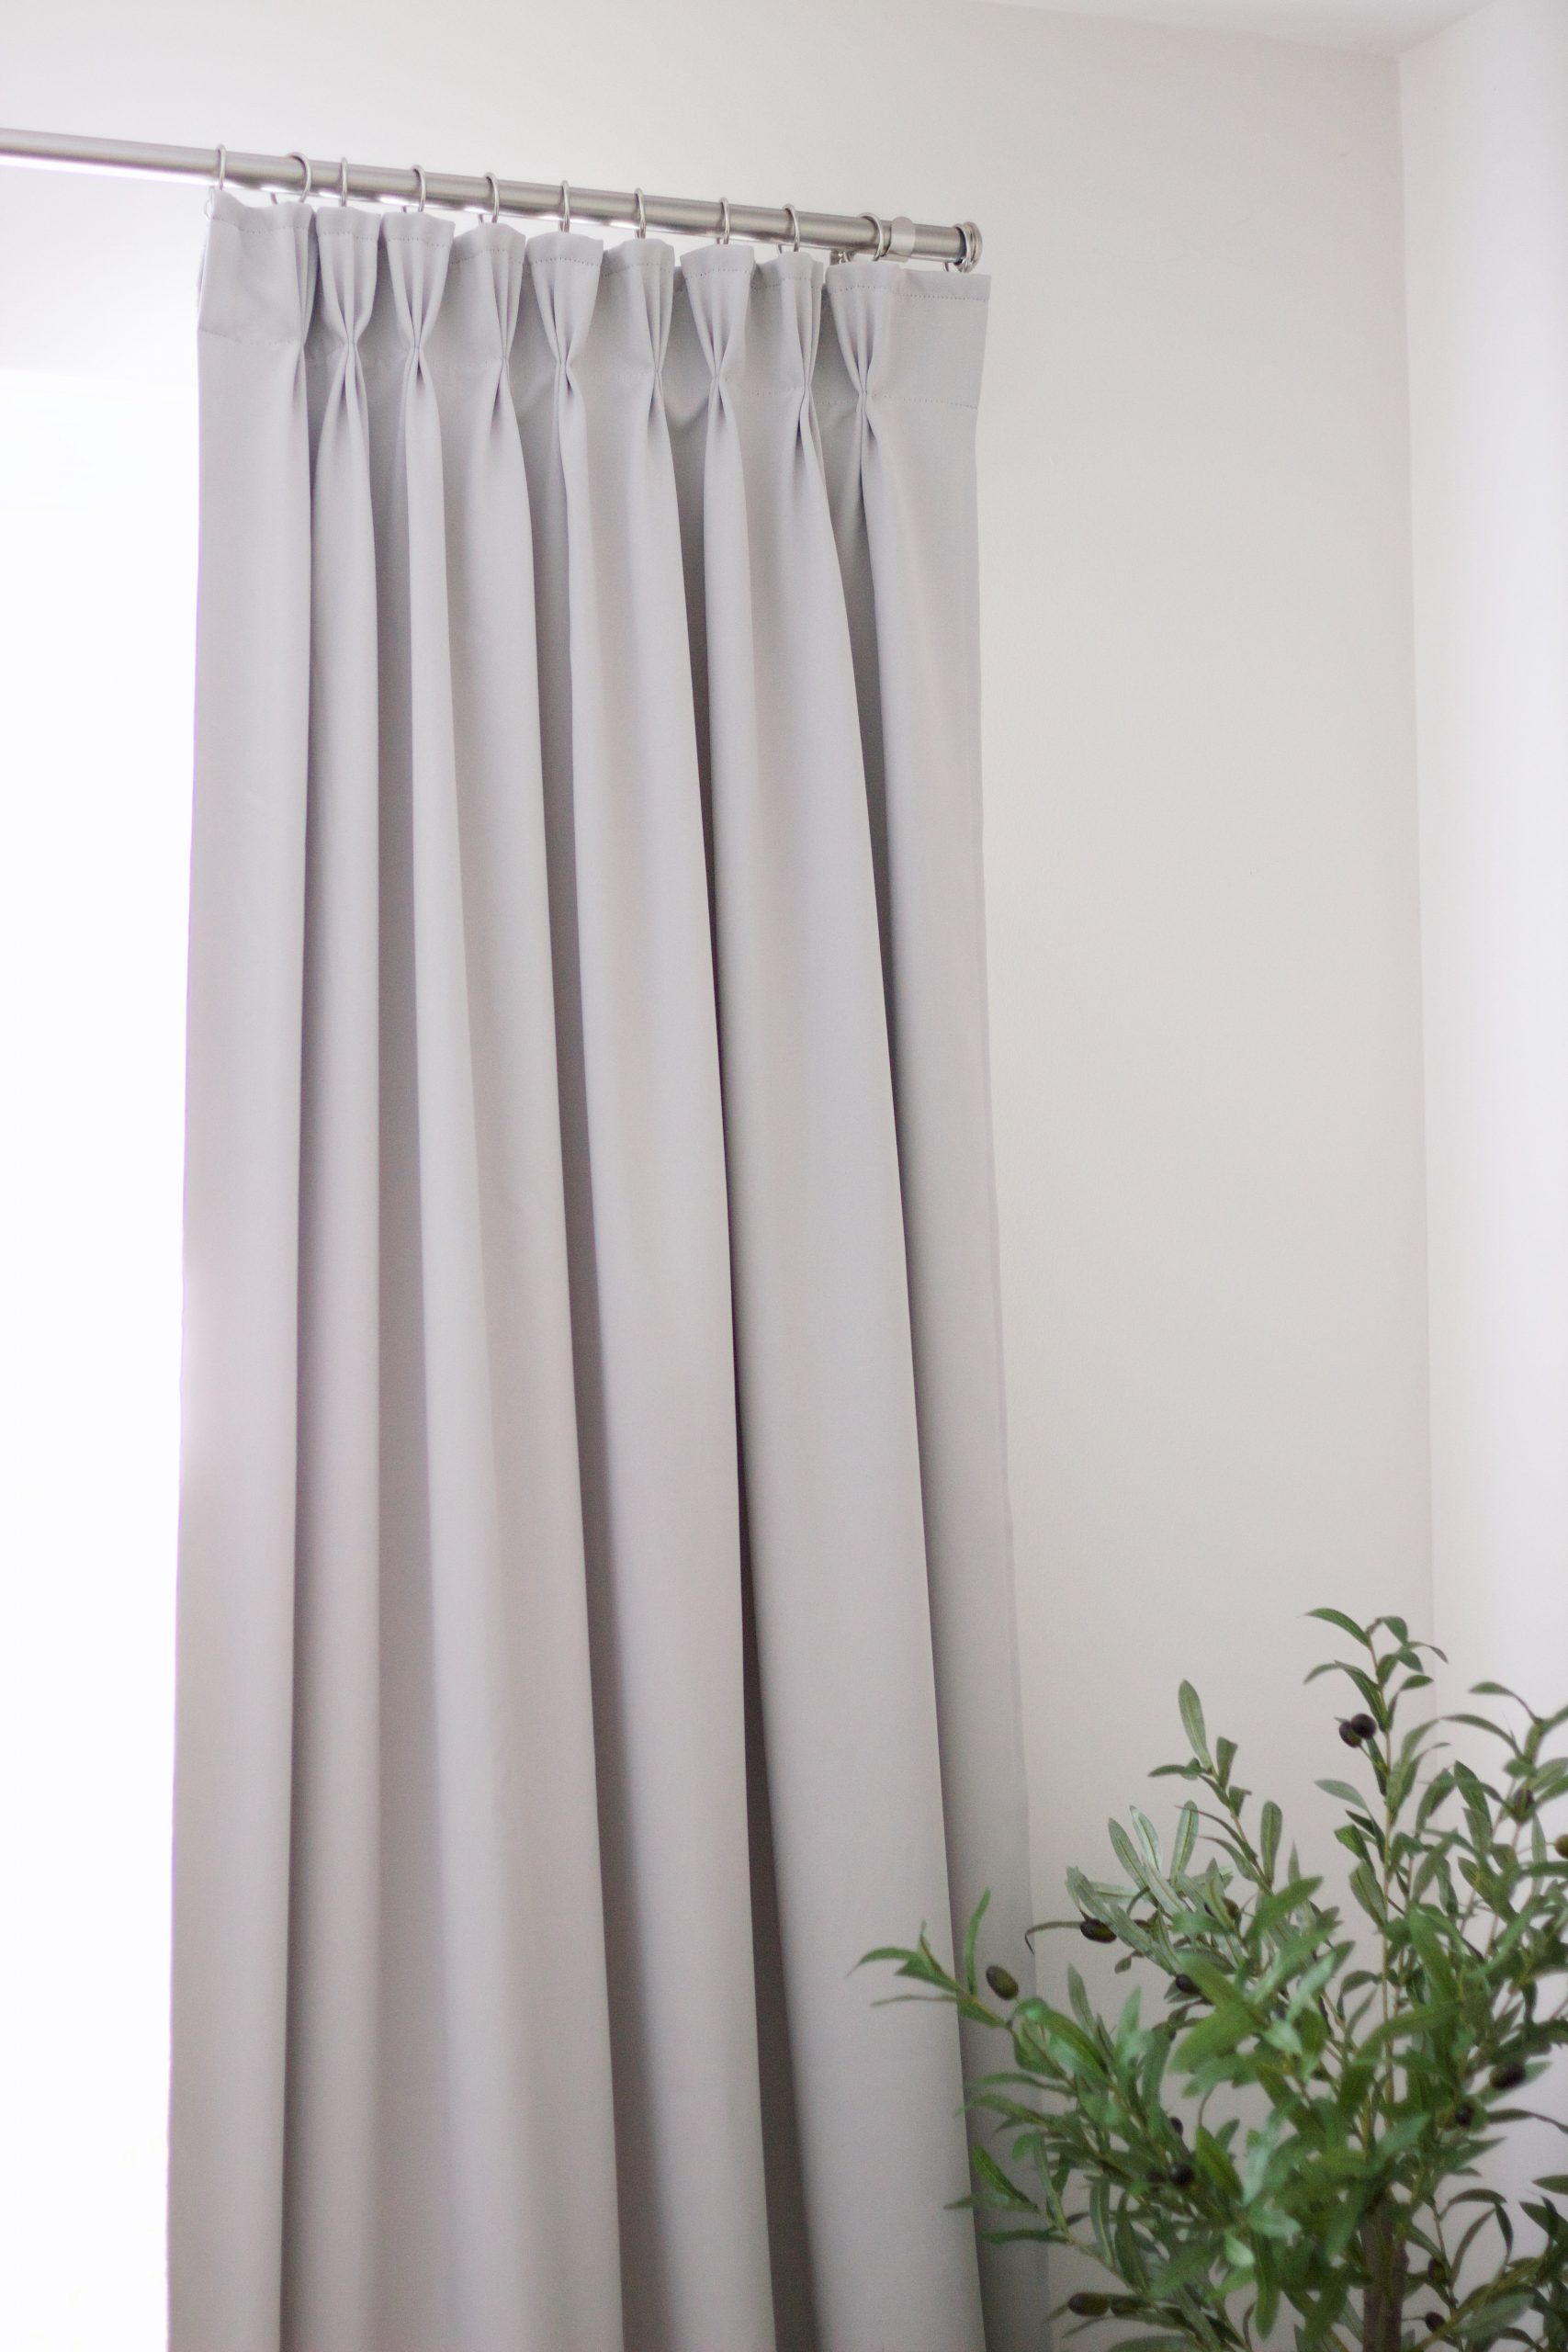 How To Pinch Pleat IKEA Curtains - Decor Hint